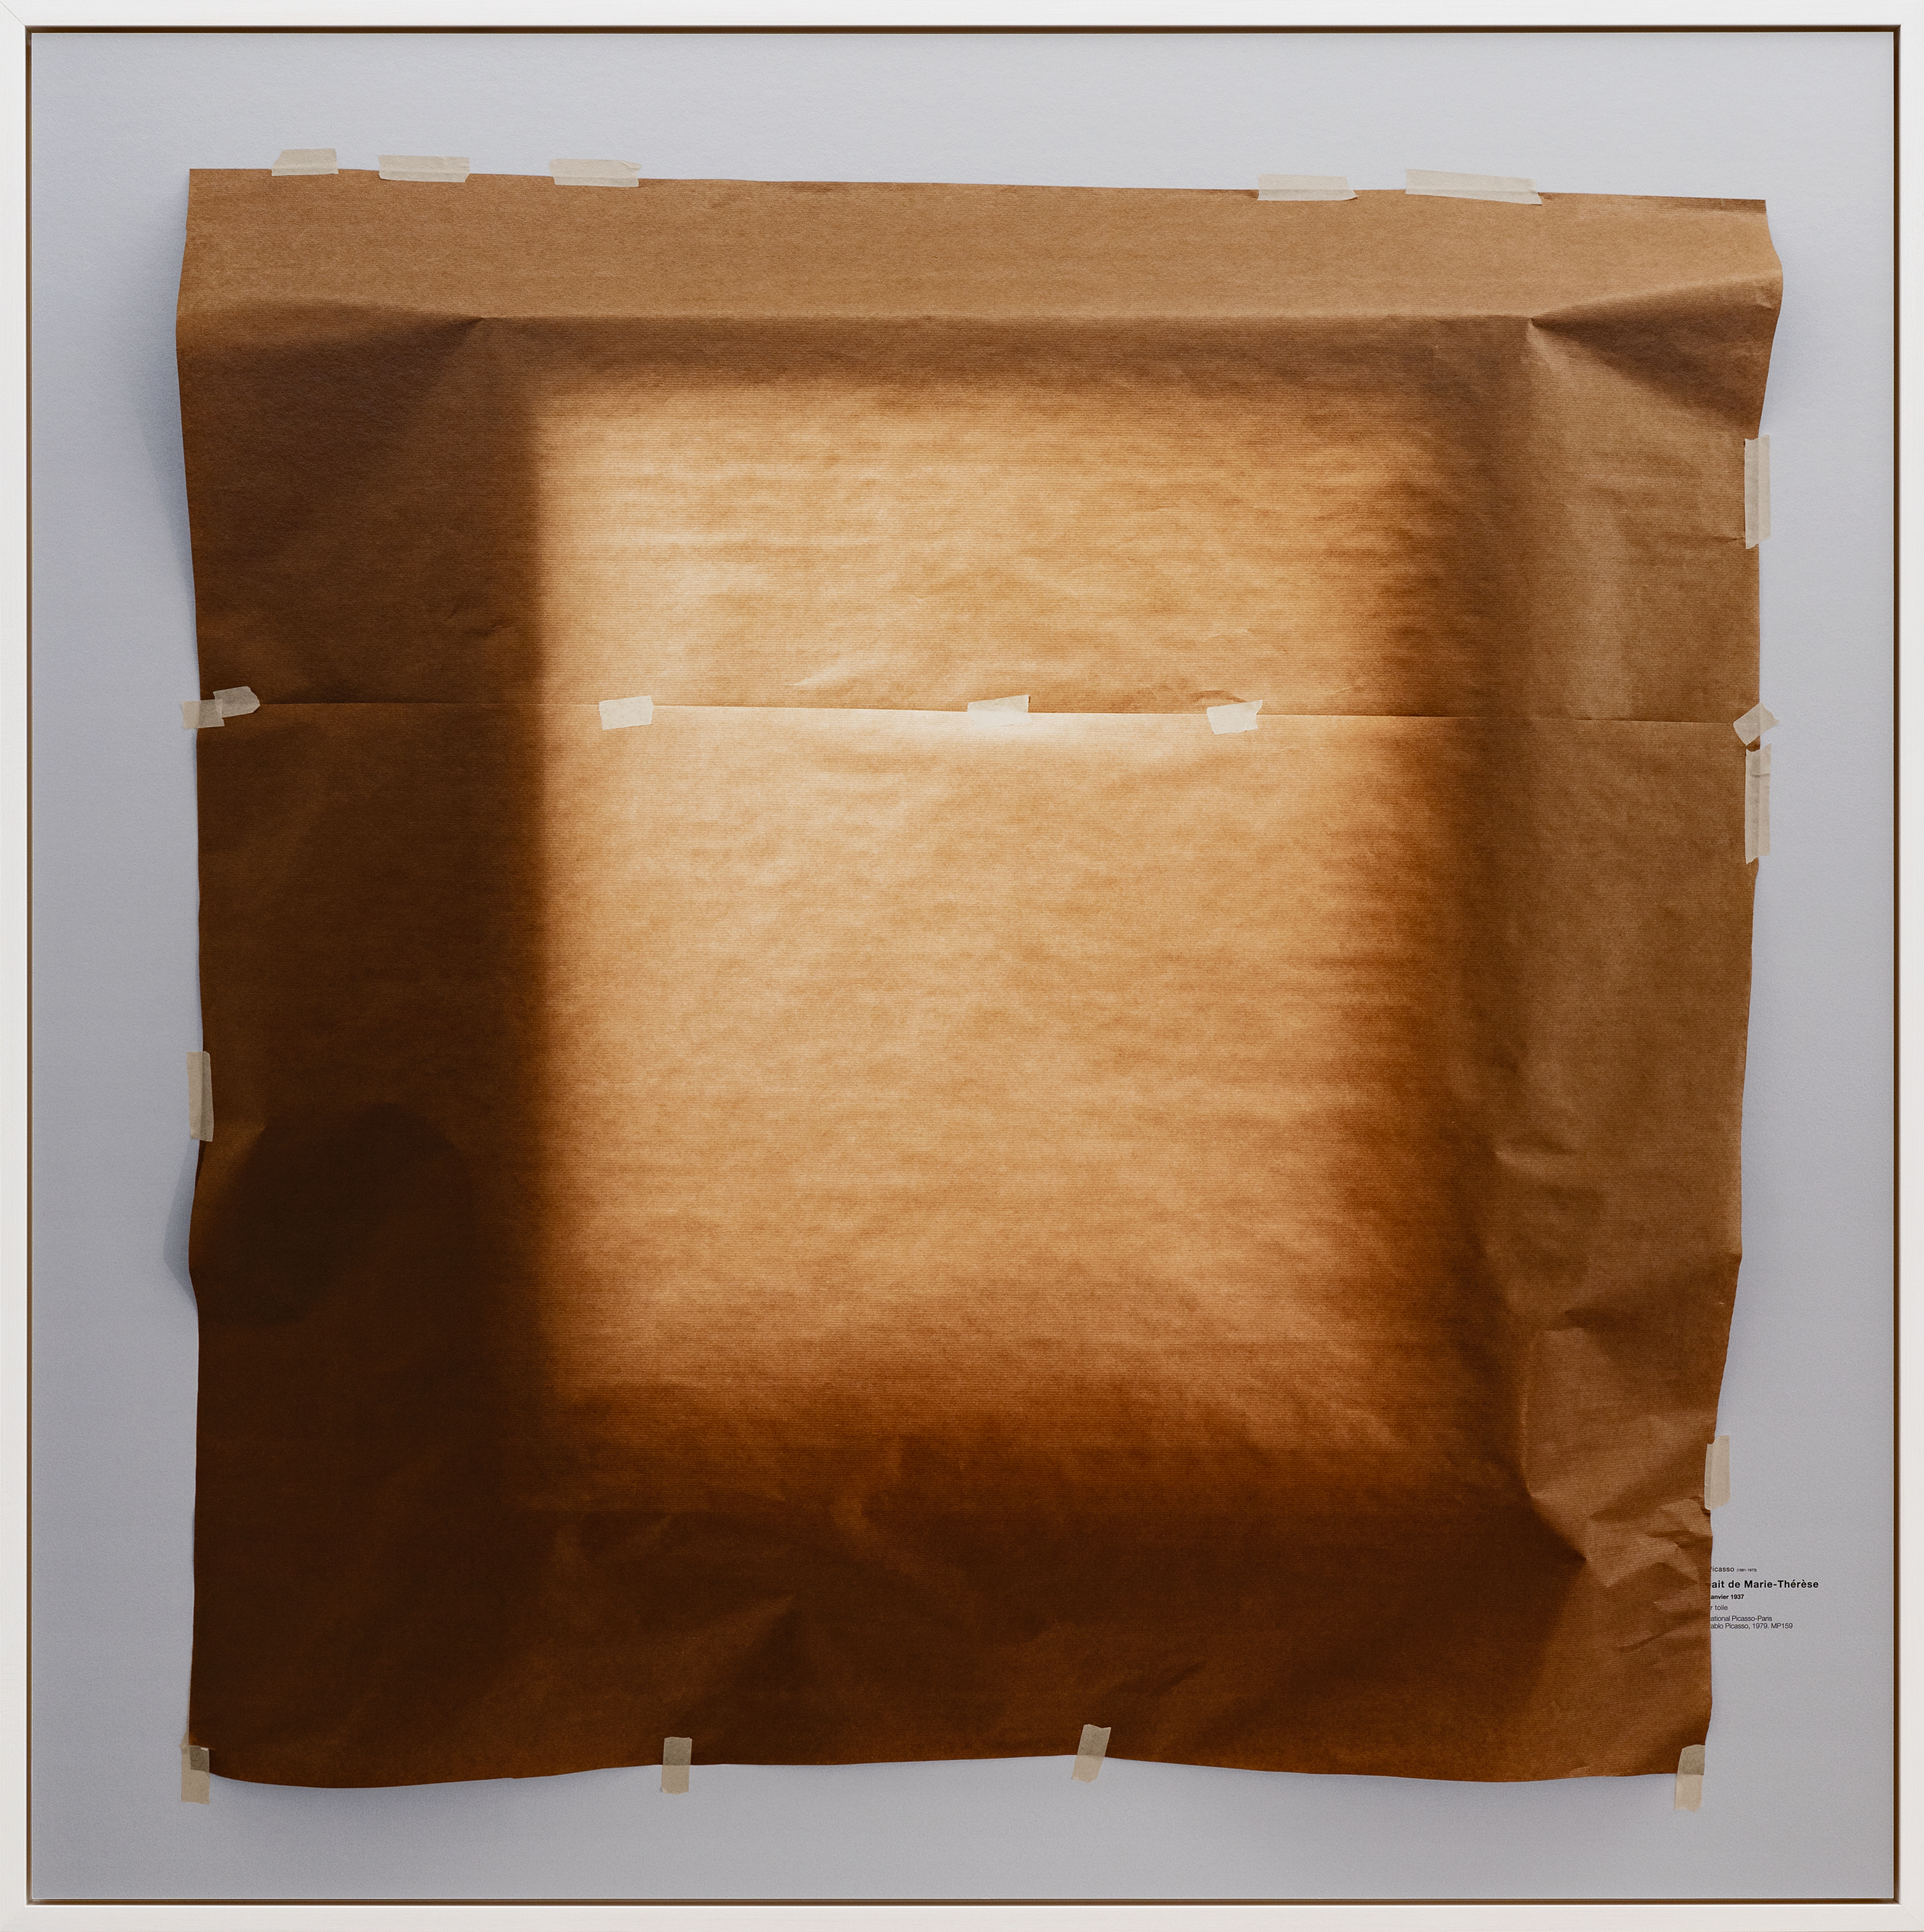 Color photograph of an installed artwork covered with brown paper and beige tape framed in white